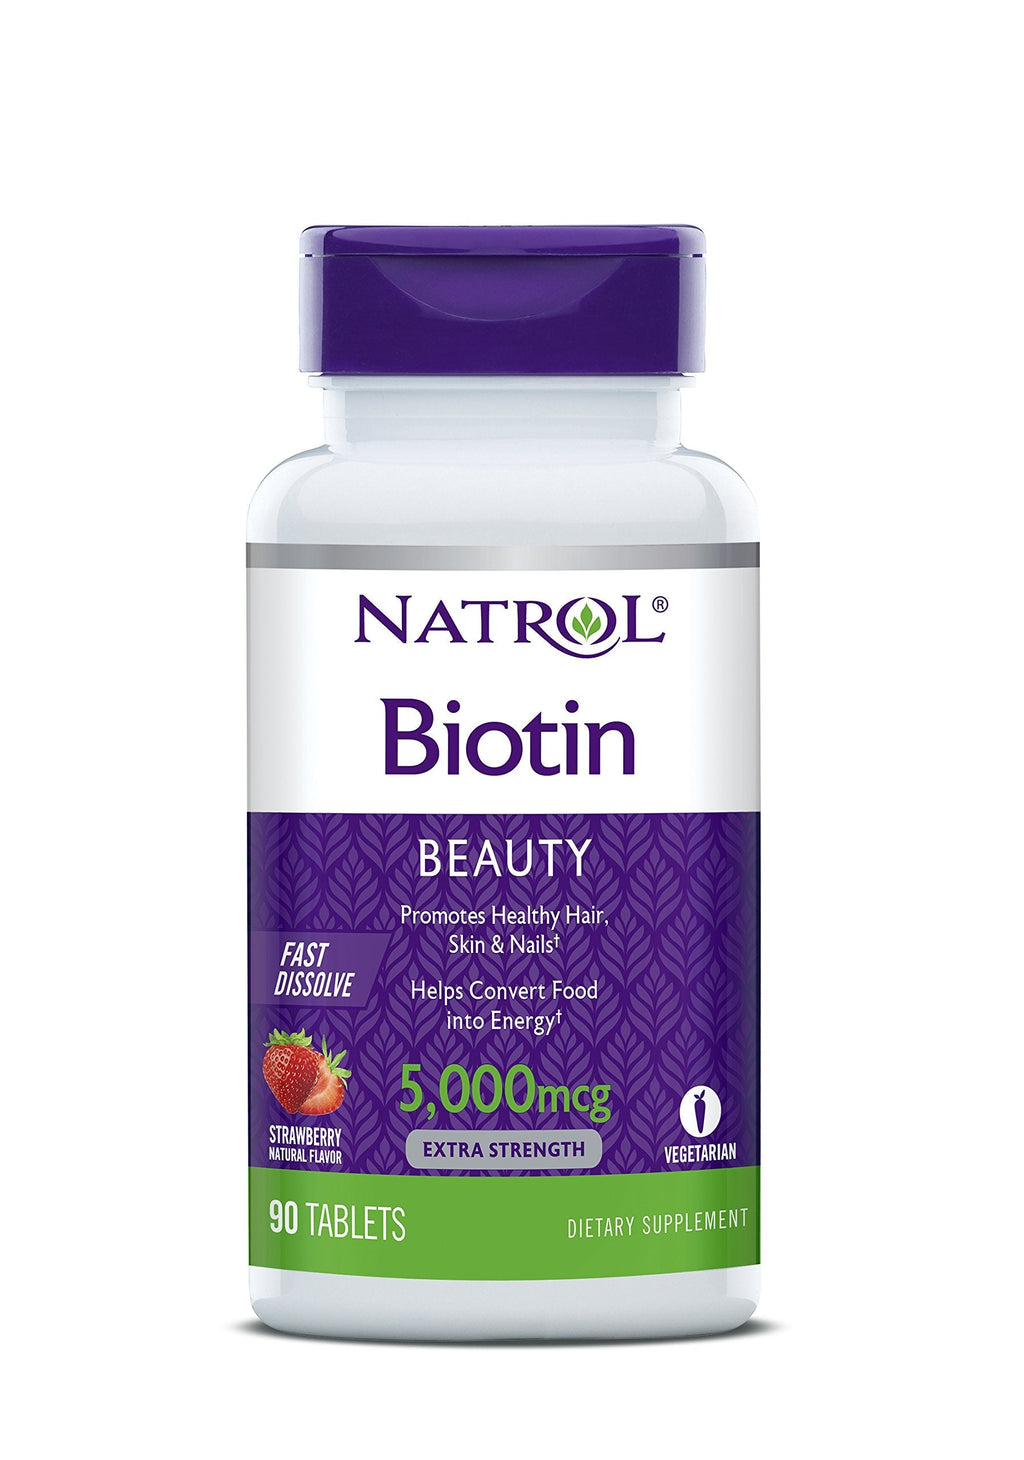 [Australia] - Natrol Biotin Beauty Tablets, Promotes Healthy Hair, Skin and Nails, Helps Support Energy Metabolism, Helps Convert Food Into Energy, 5,000mcg, 90Count 90 Count (Pack of 1) 